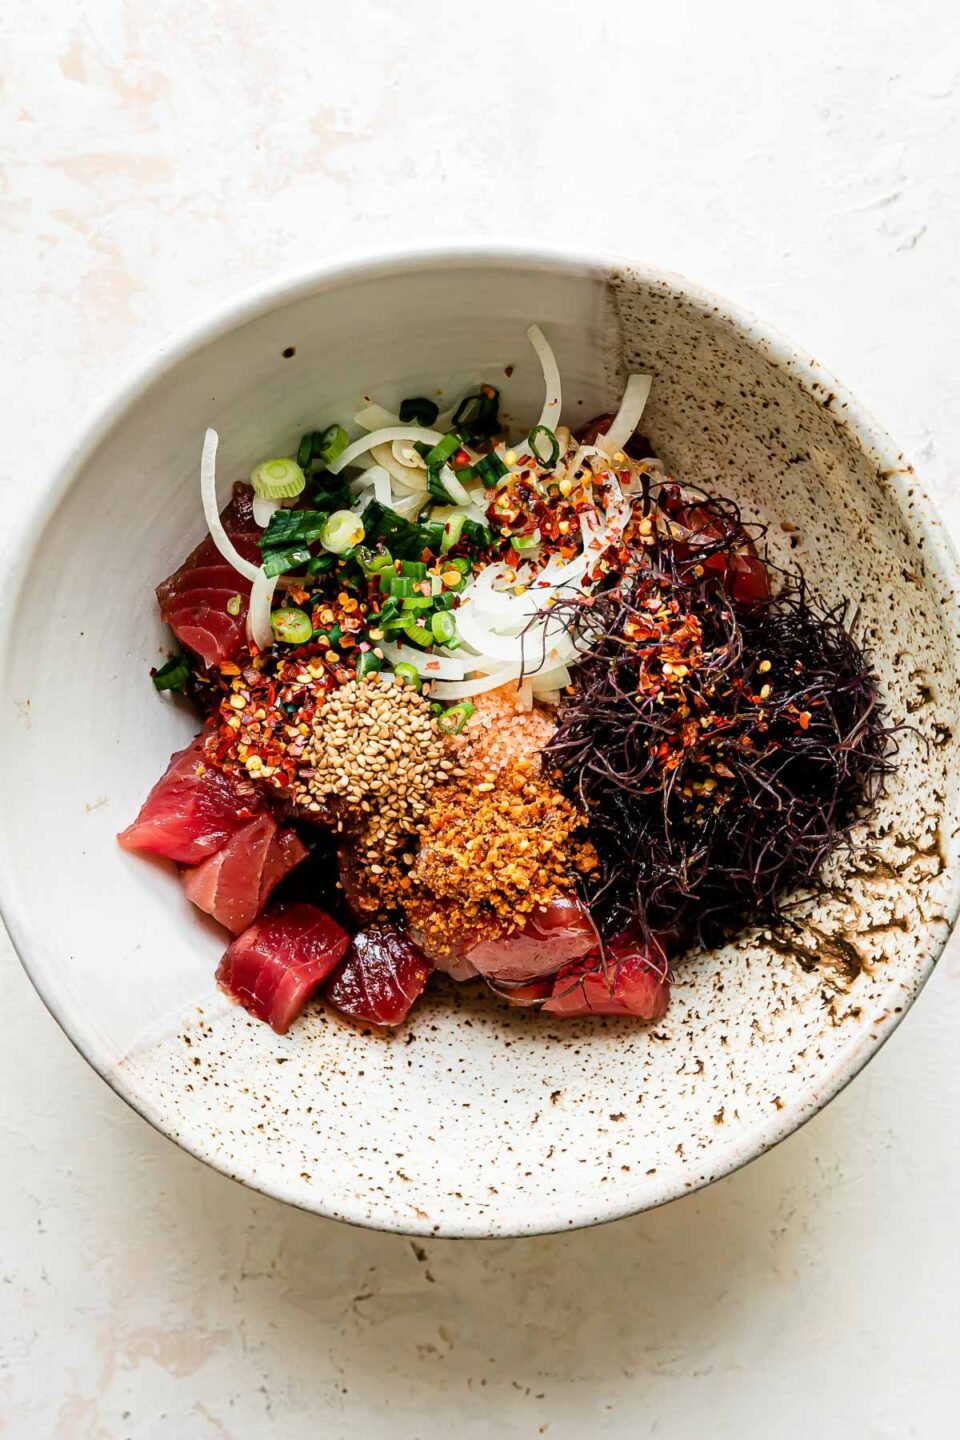 Tuna poke components are arranged in a large ceramic bowl that sits atop a creamy white textured surface: ahi tuna, sweet onion, green onions, ogo or limu, shoyu, toasted sesame oil, Hawaiian sea salt, Inamona, toasted sesame seeds, and crushed red pepper.